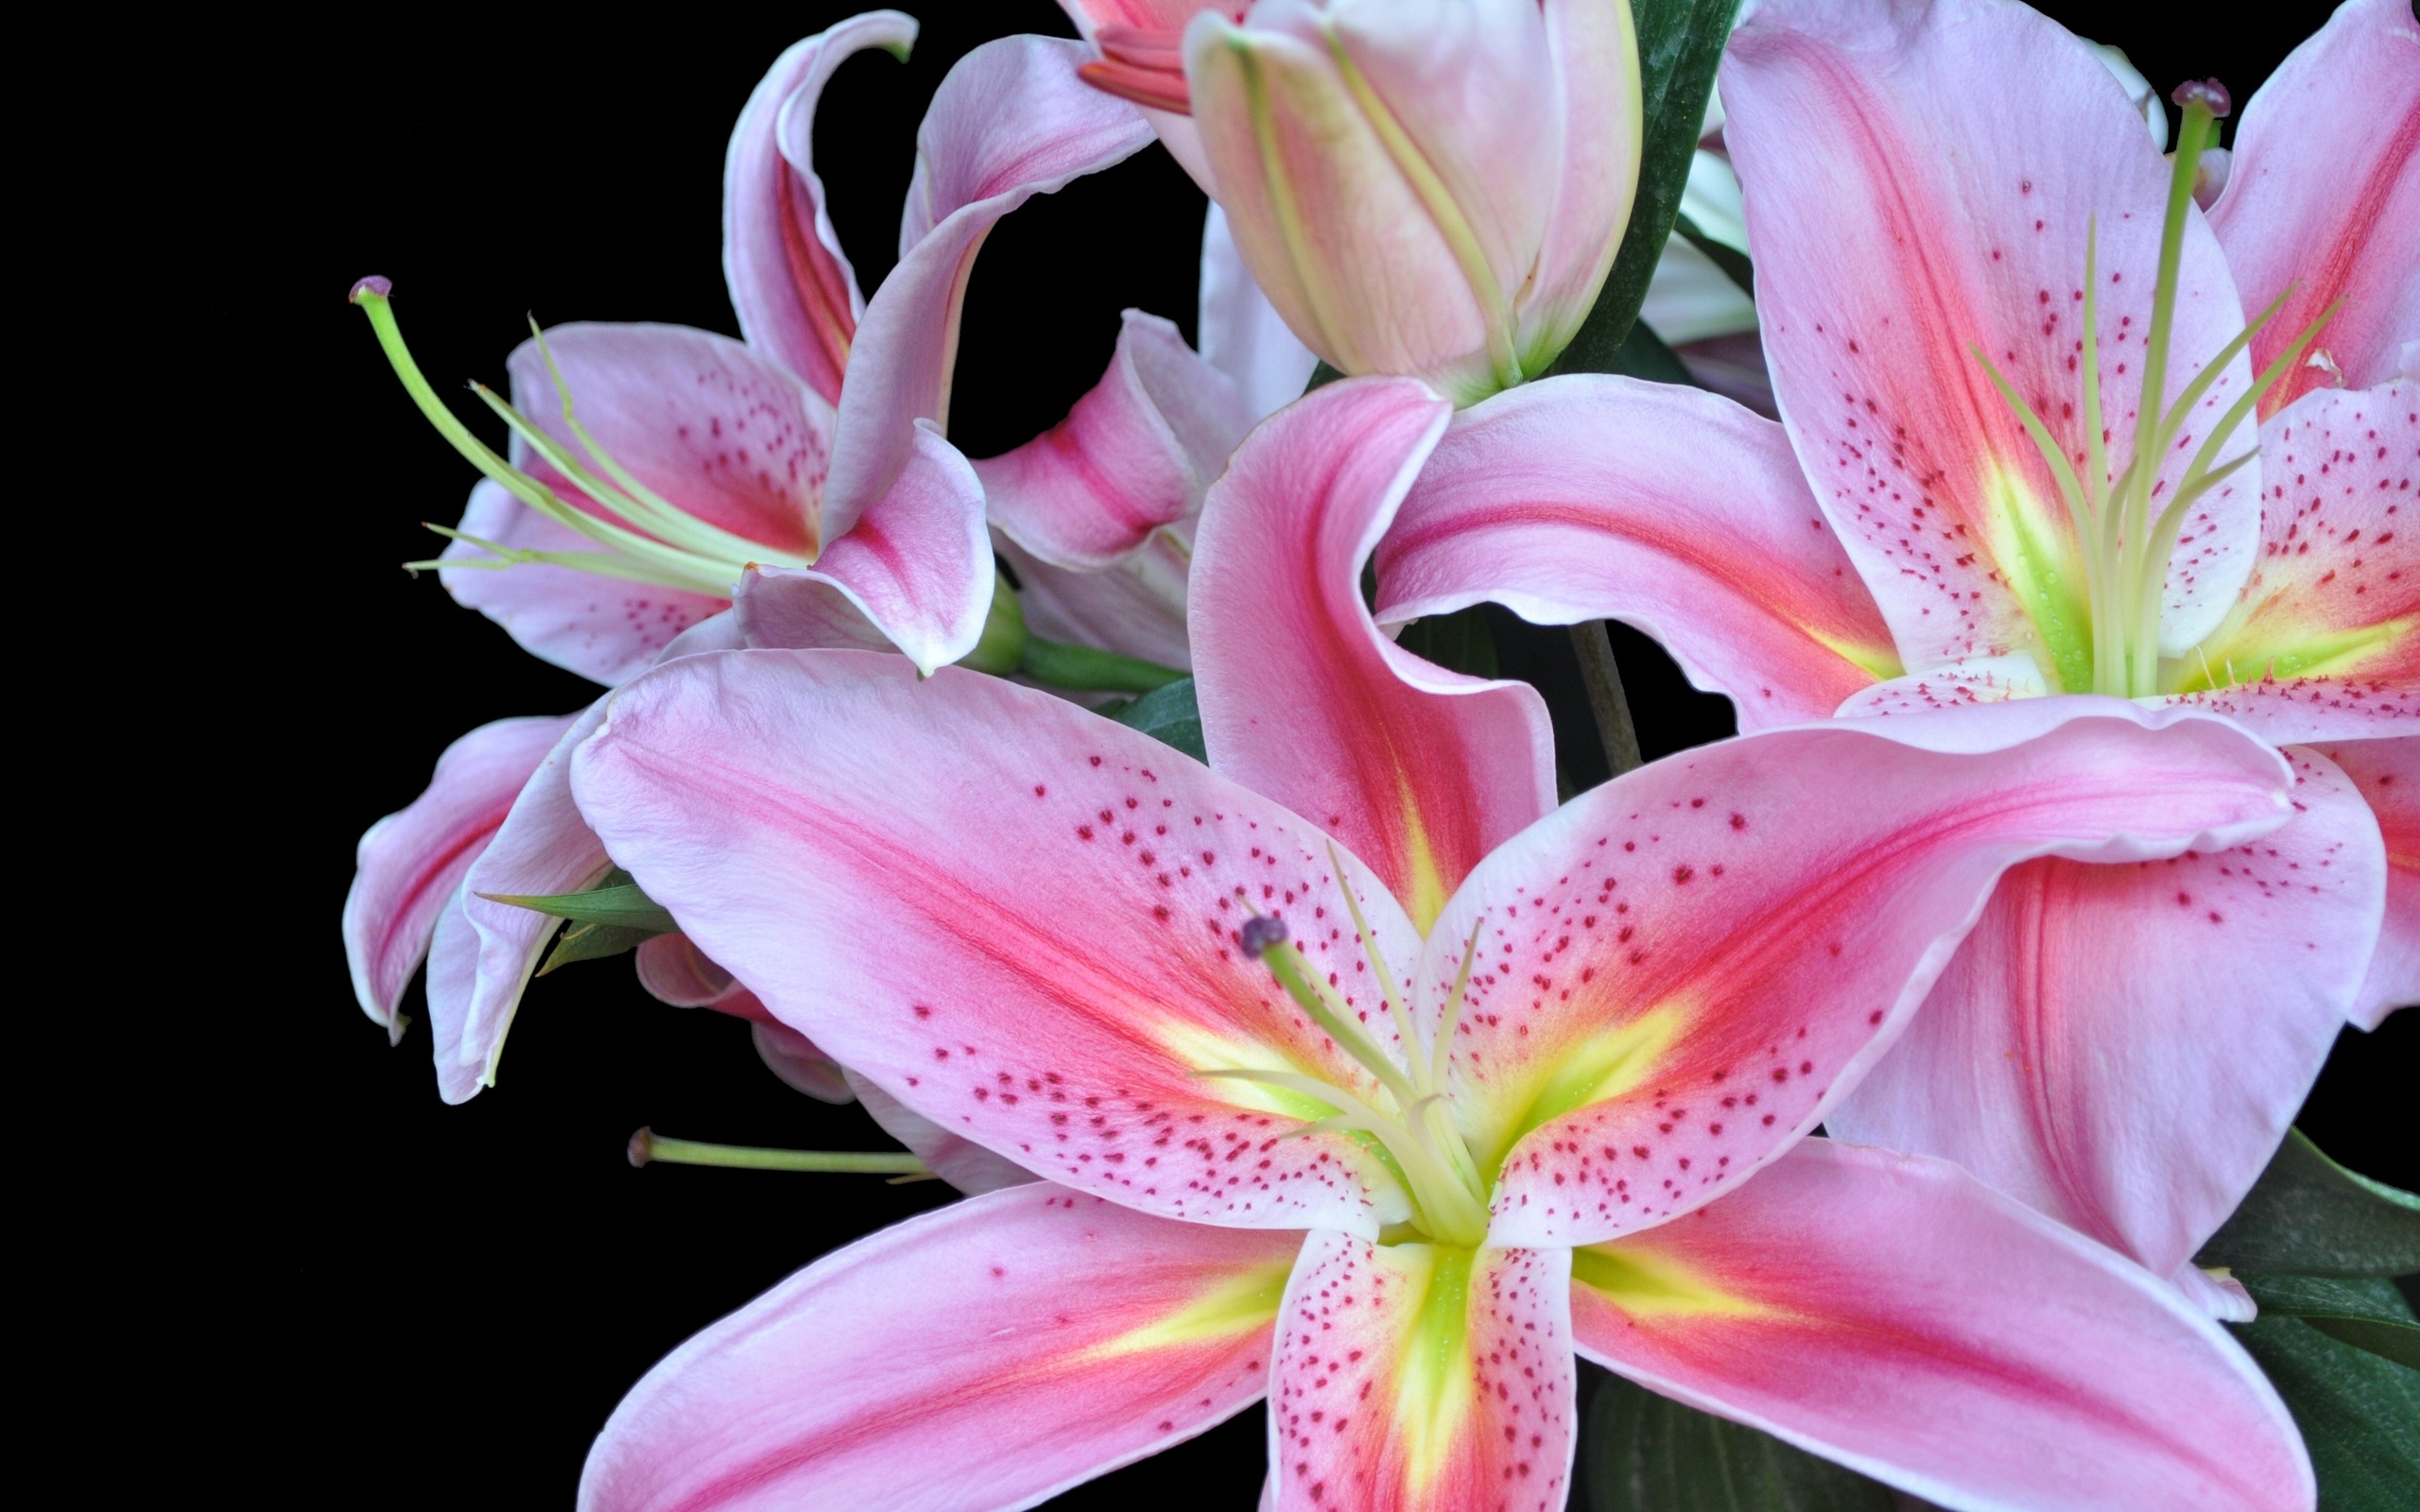 15 Best lily flower desktop wallpaper You Can Use It For Free - Aesthetic Arena